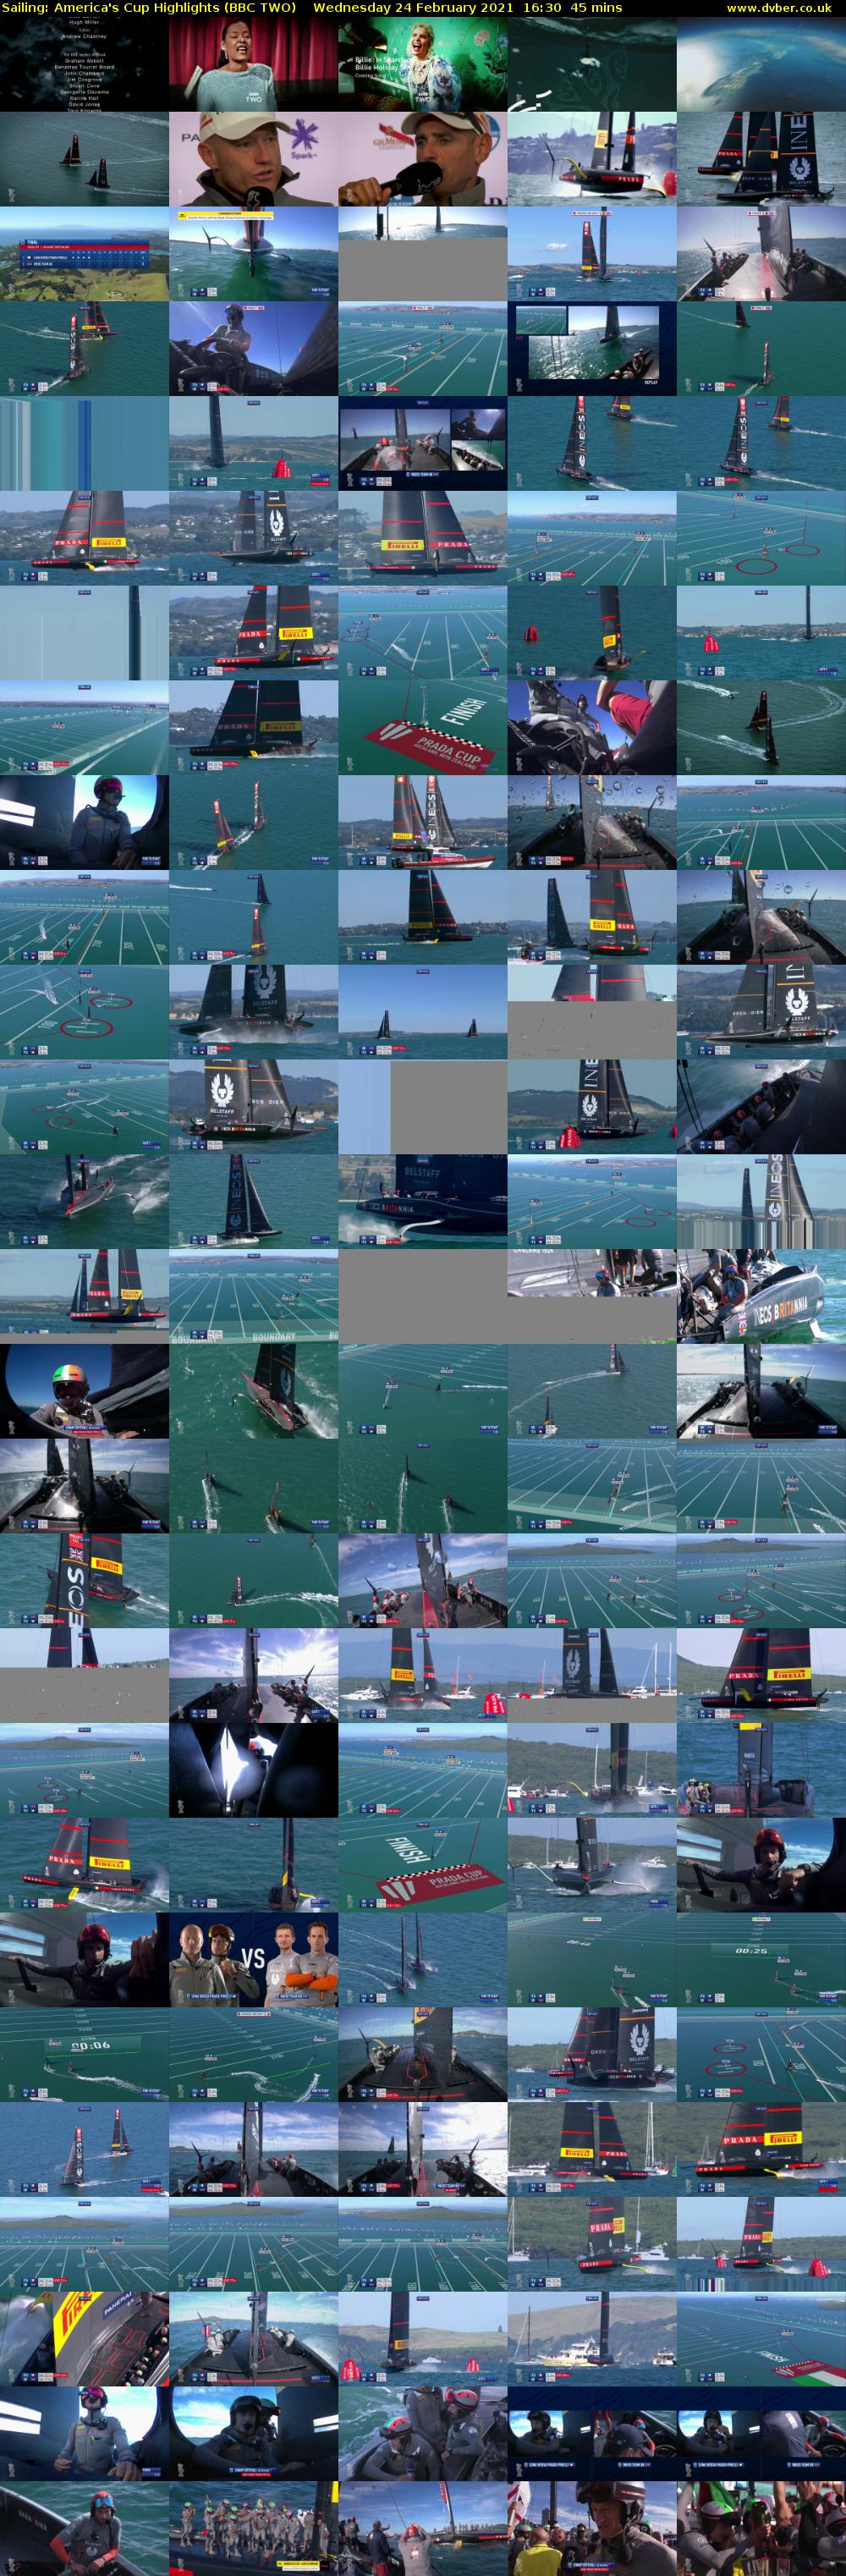 Sailing: America's Cup Highlights (BBC TWO) Wednesday 24 February 2021 16:30 - 17:15